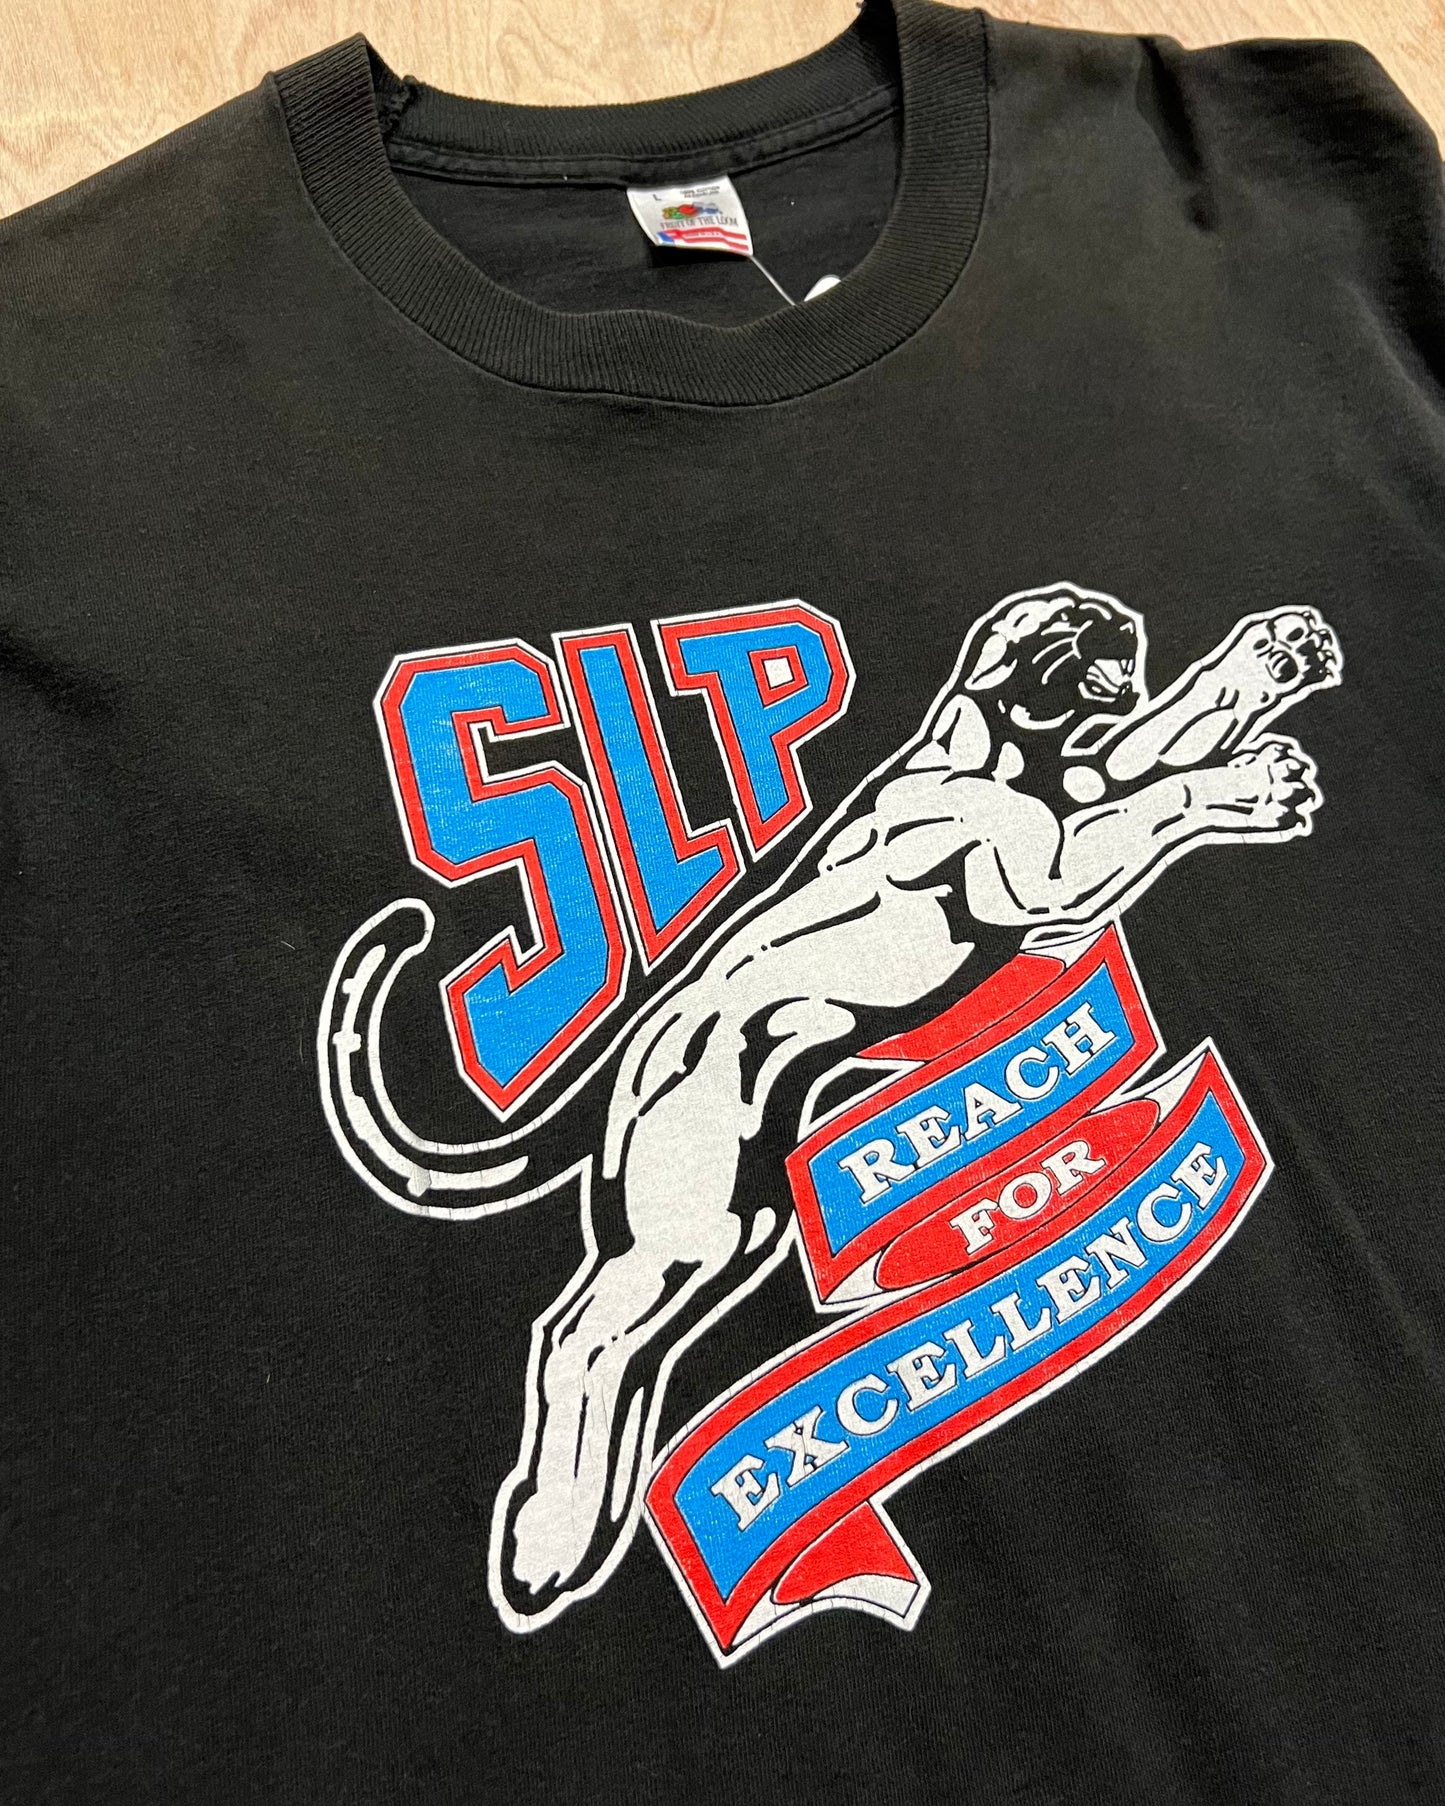 Vintage Fruit of the Loom SLP "Reach for Excellence" Single Stitch T-Shirt